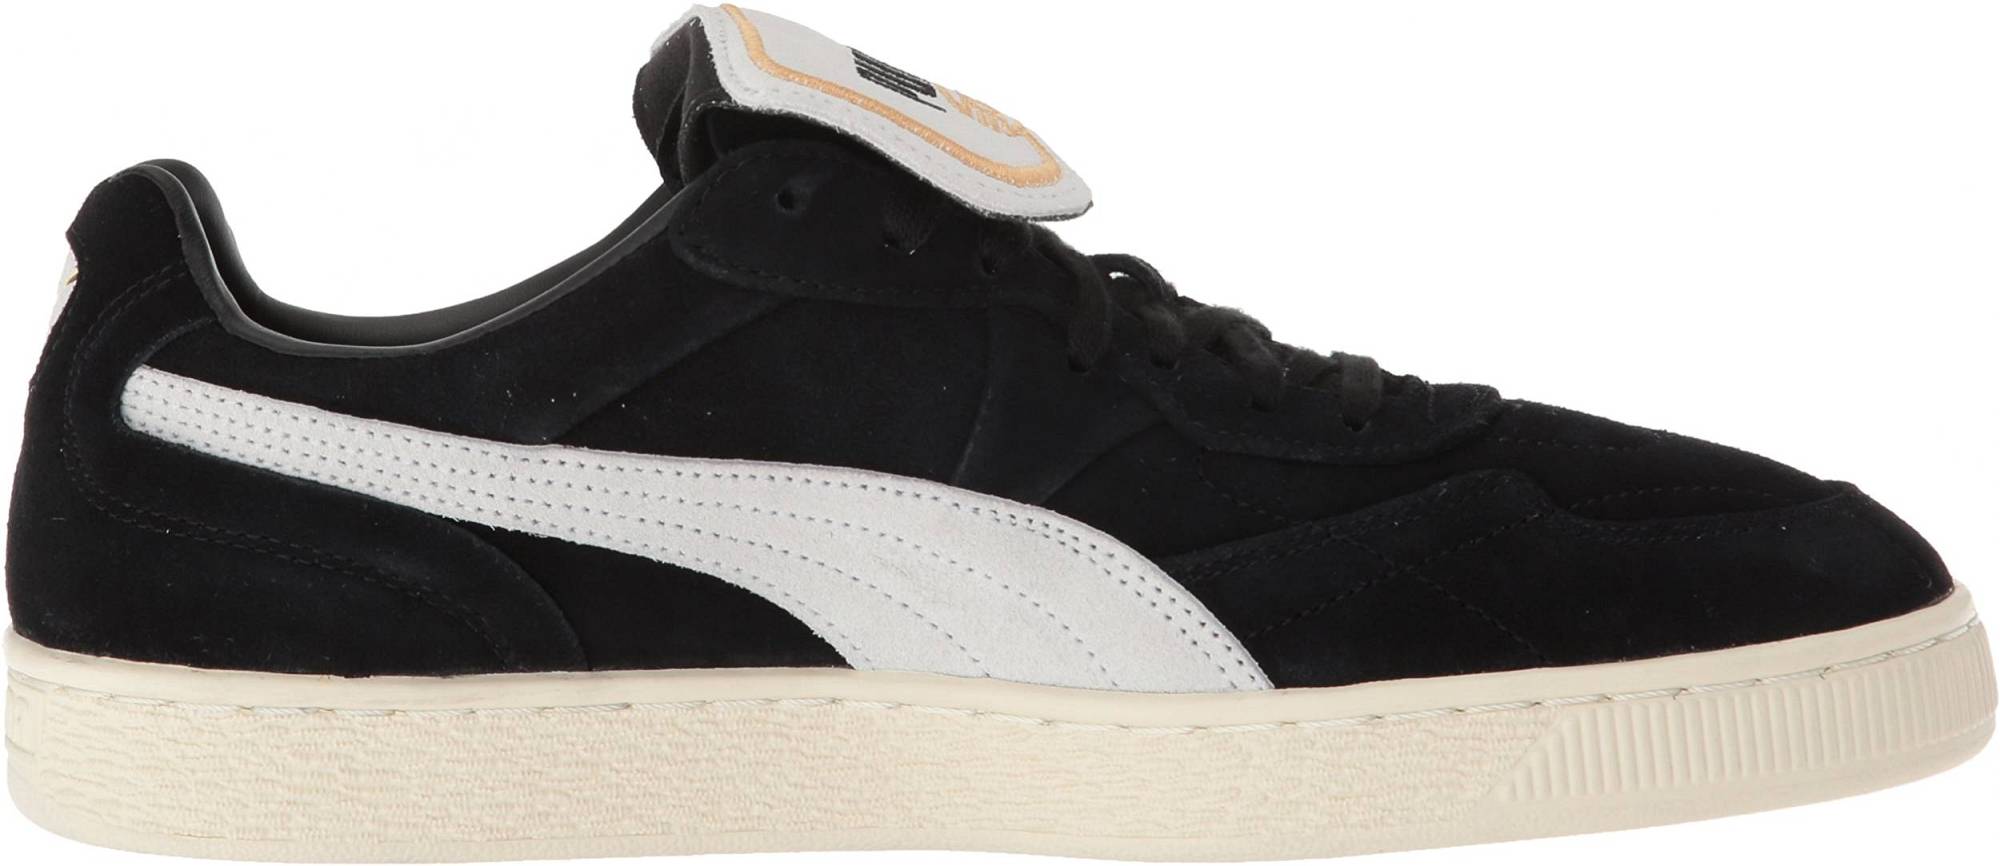 Puma King Suede Legends – Shoes Reviews & Reasons To Buy